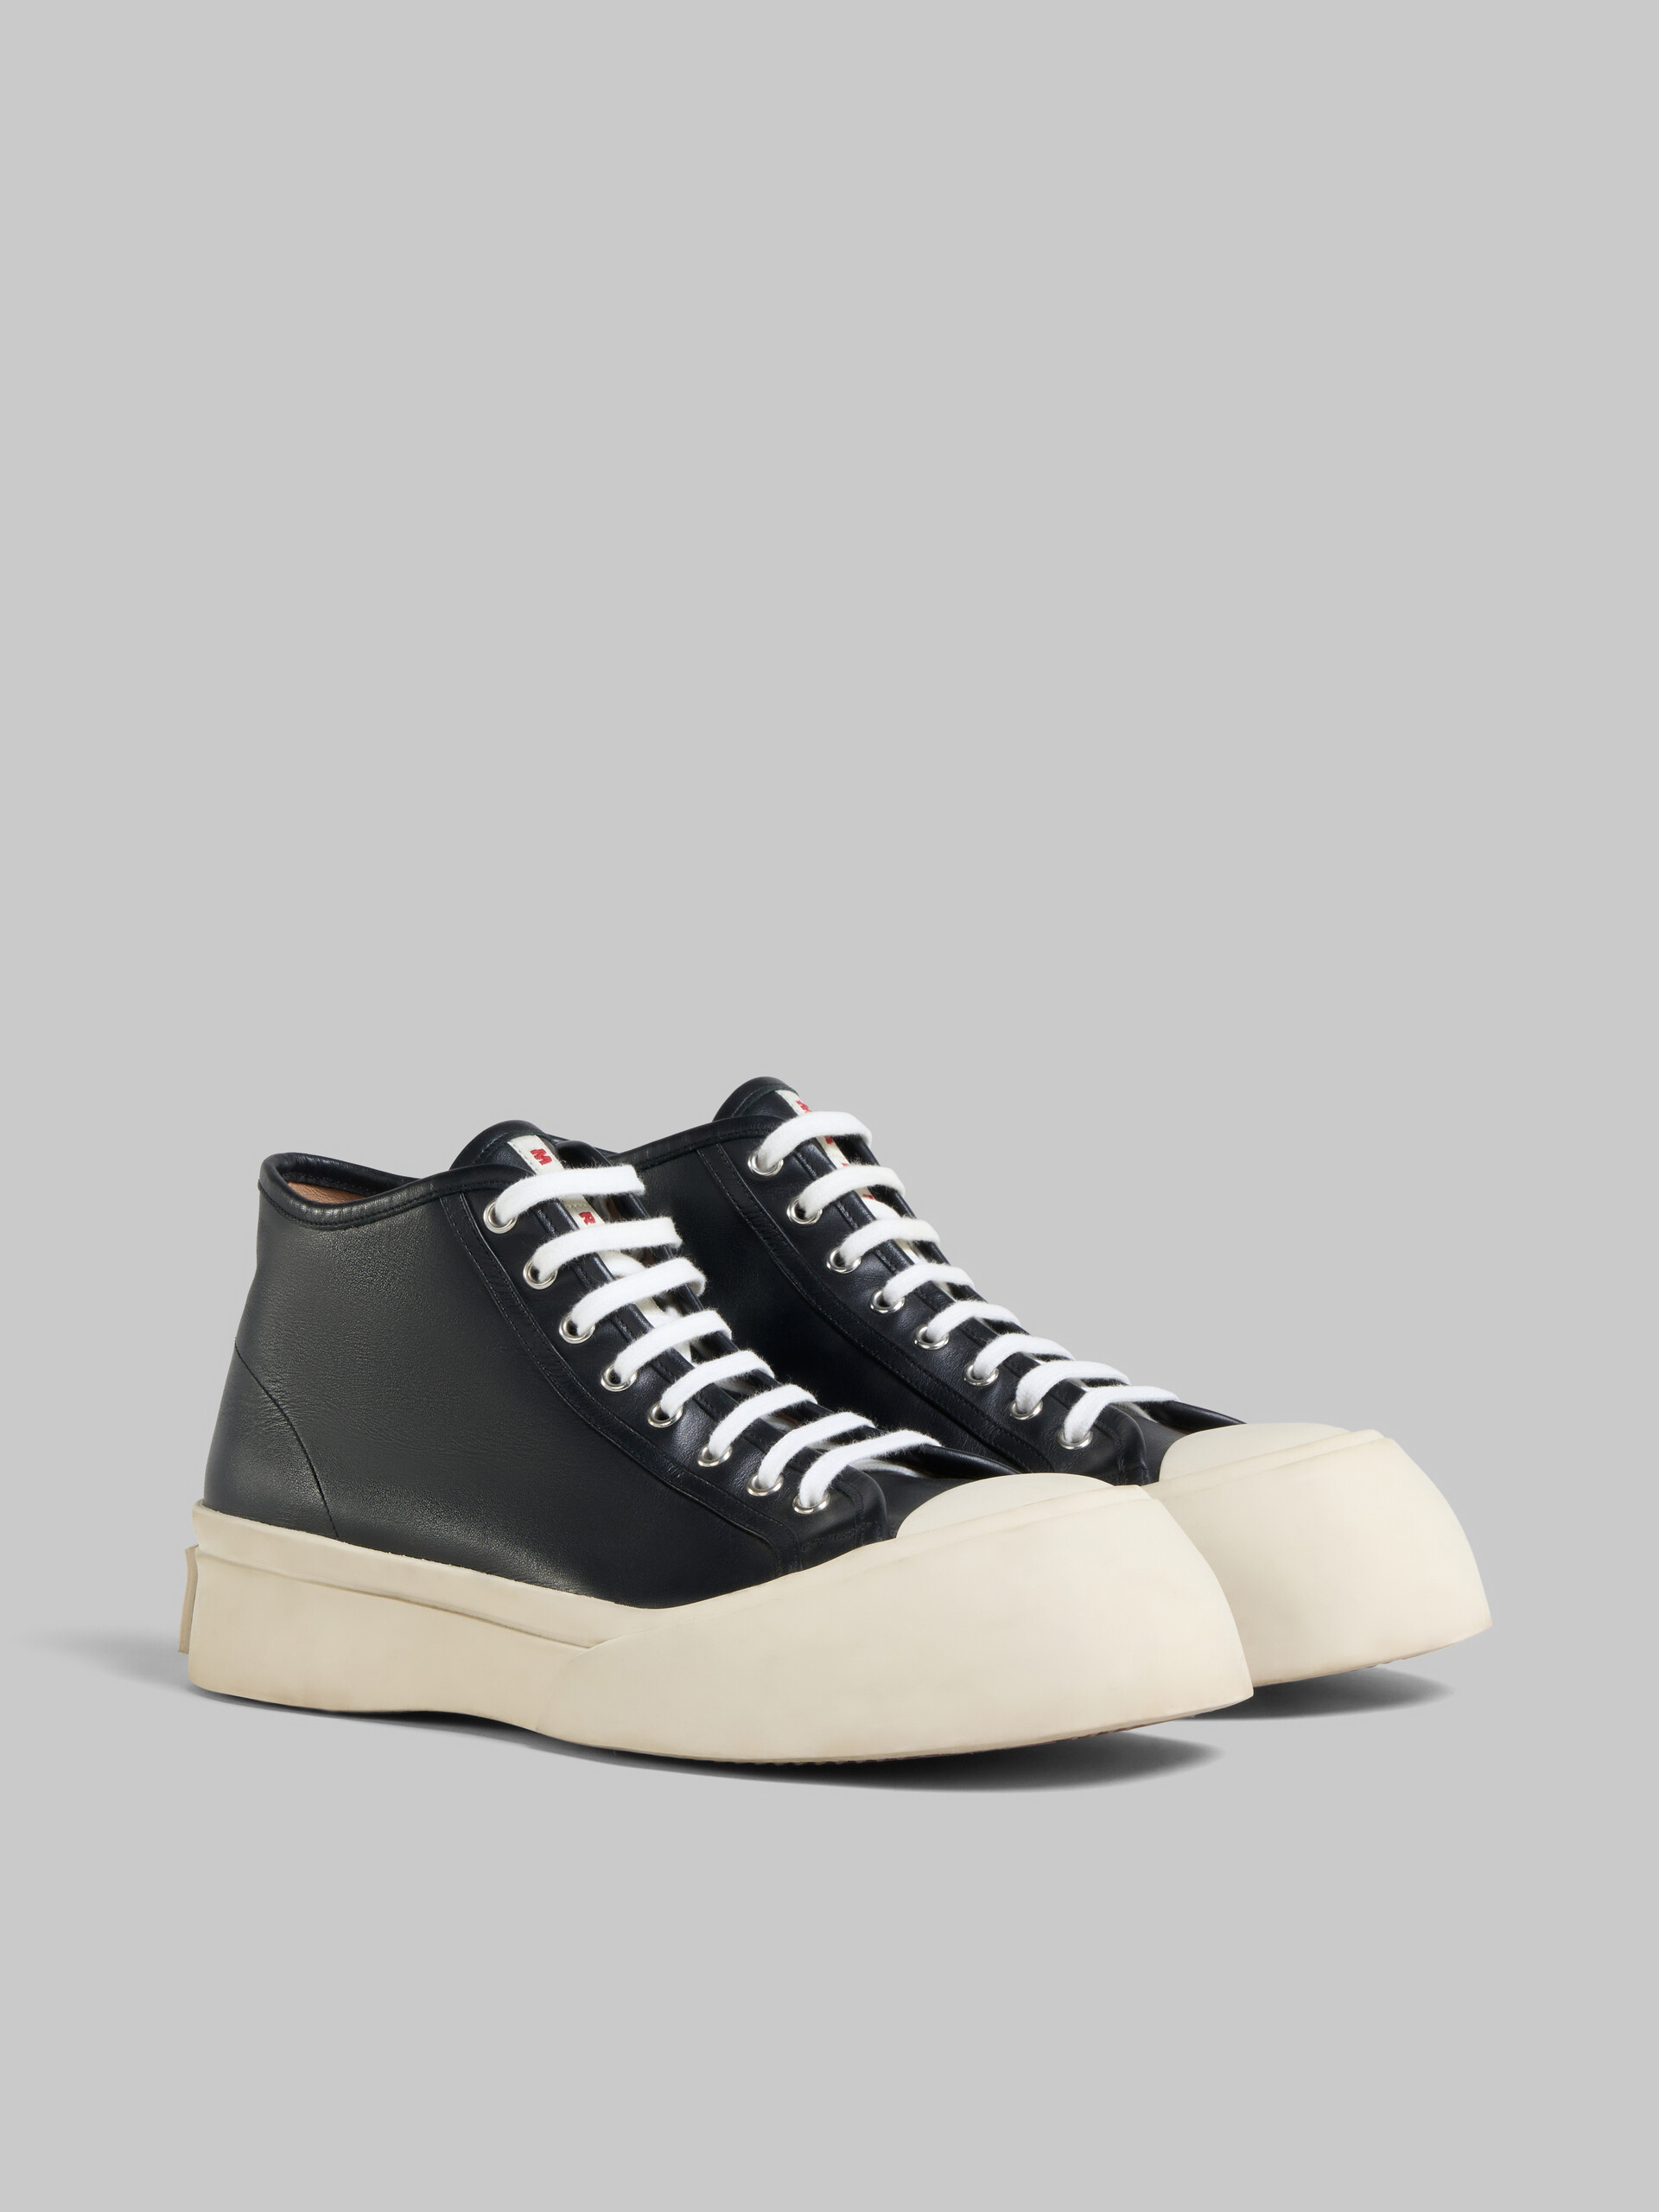 Blue nappa leather Pablo high-top sneaker - Sneakers - Image 2